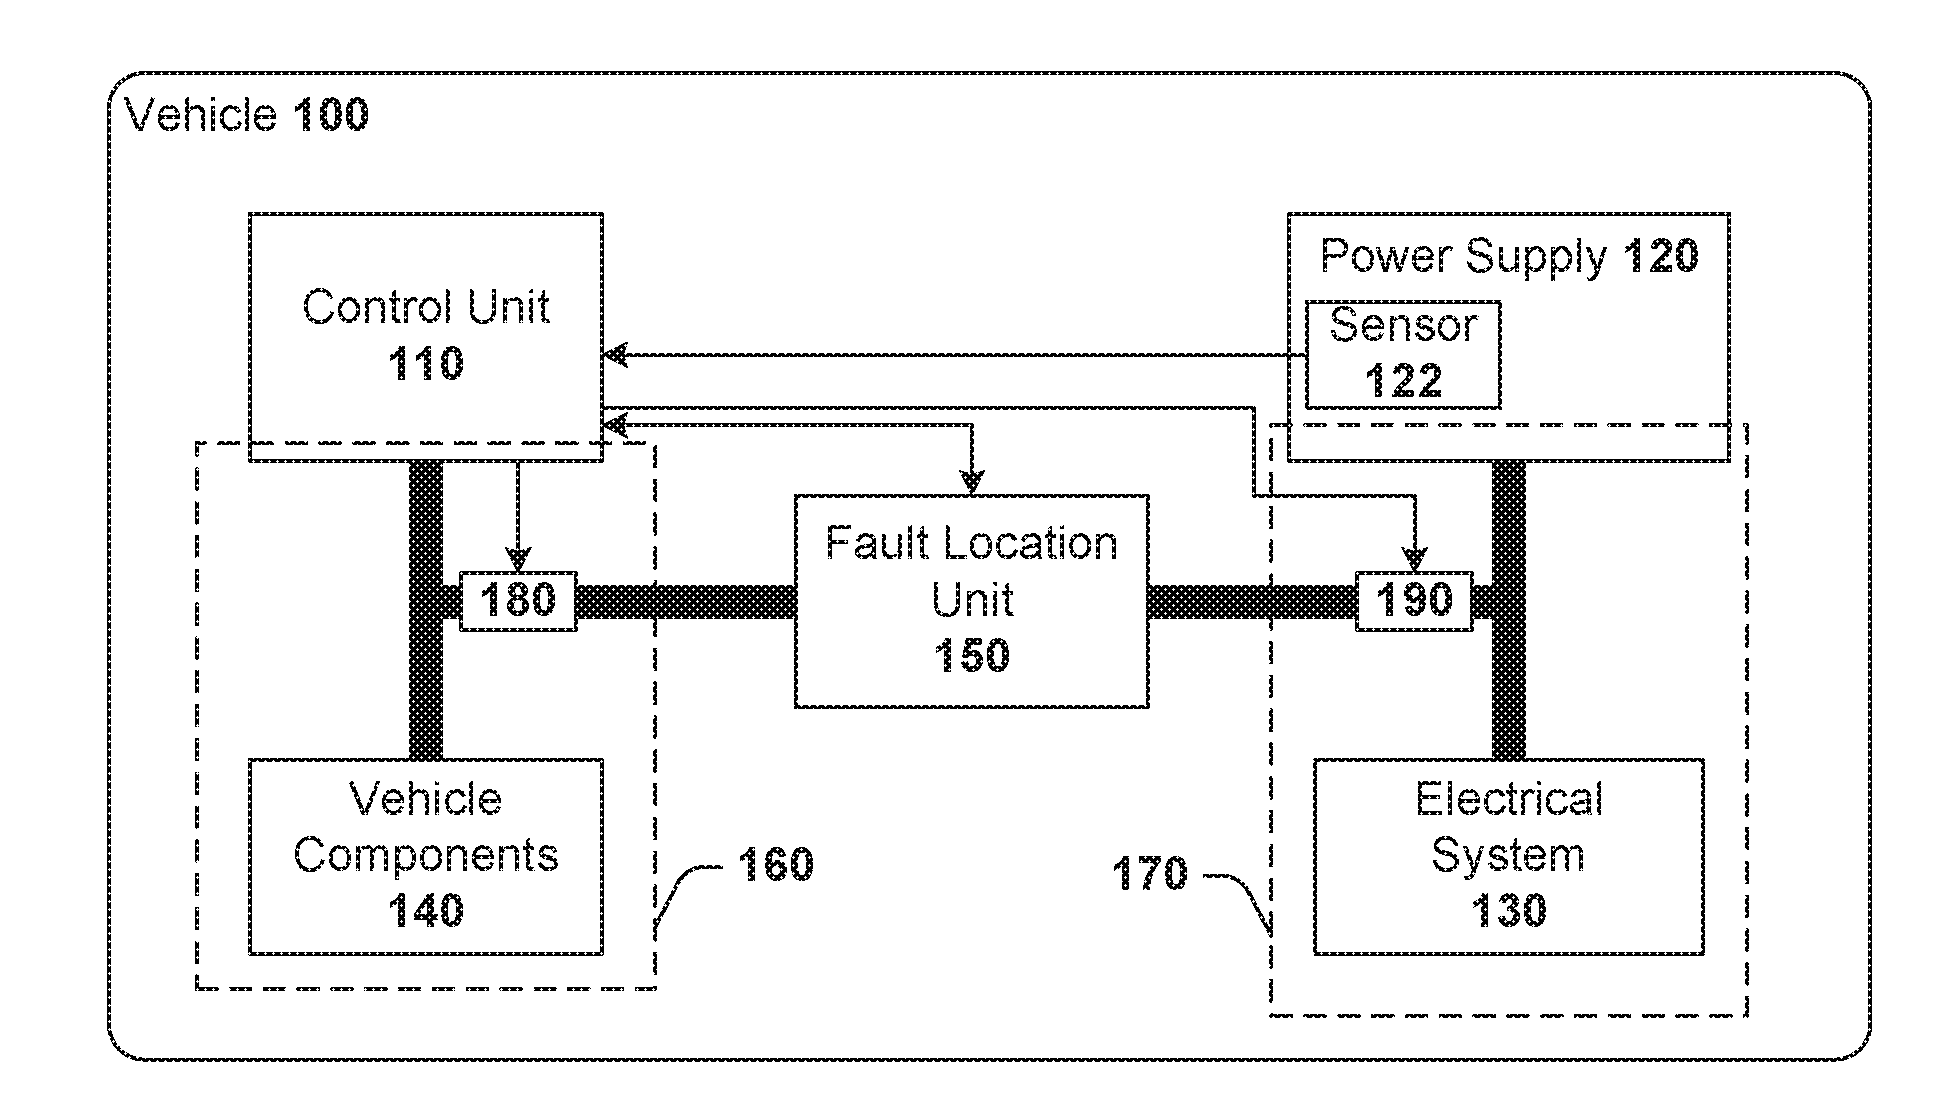 Systems for detecting electrical faults in a vehicle